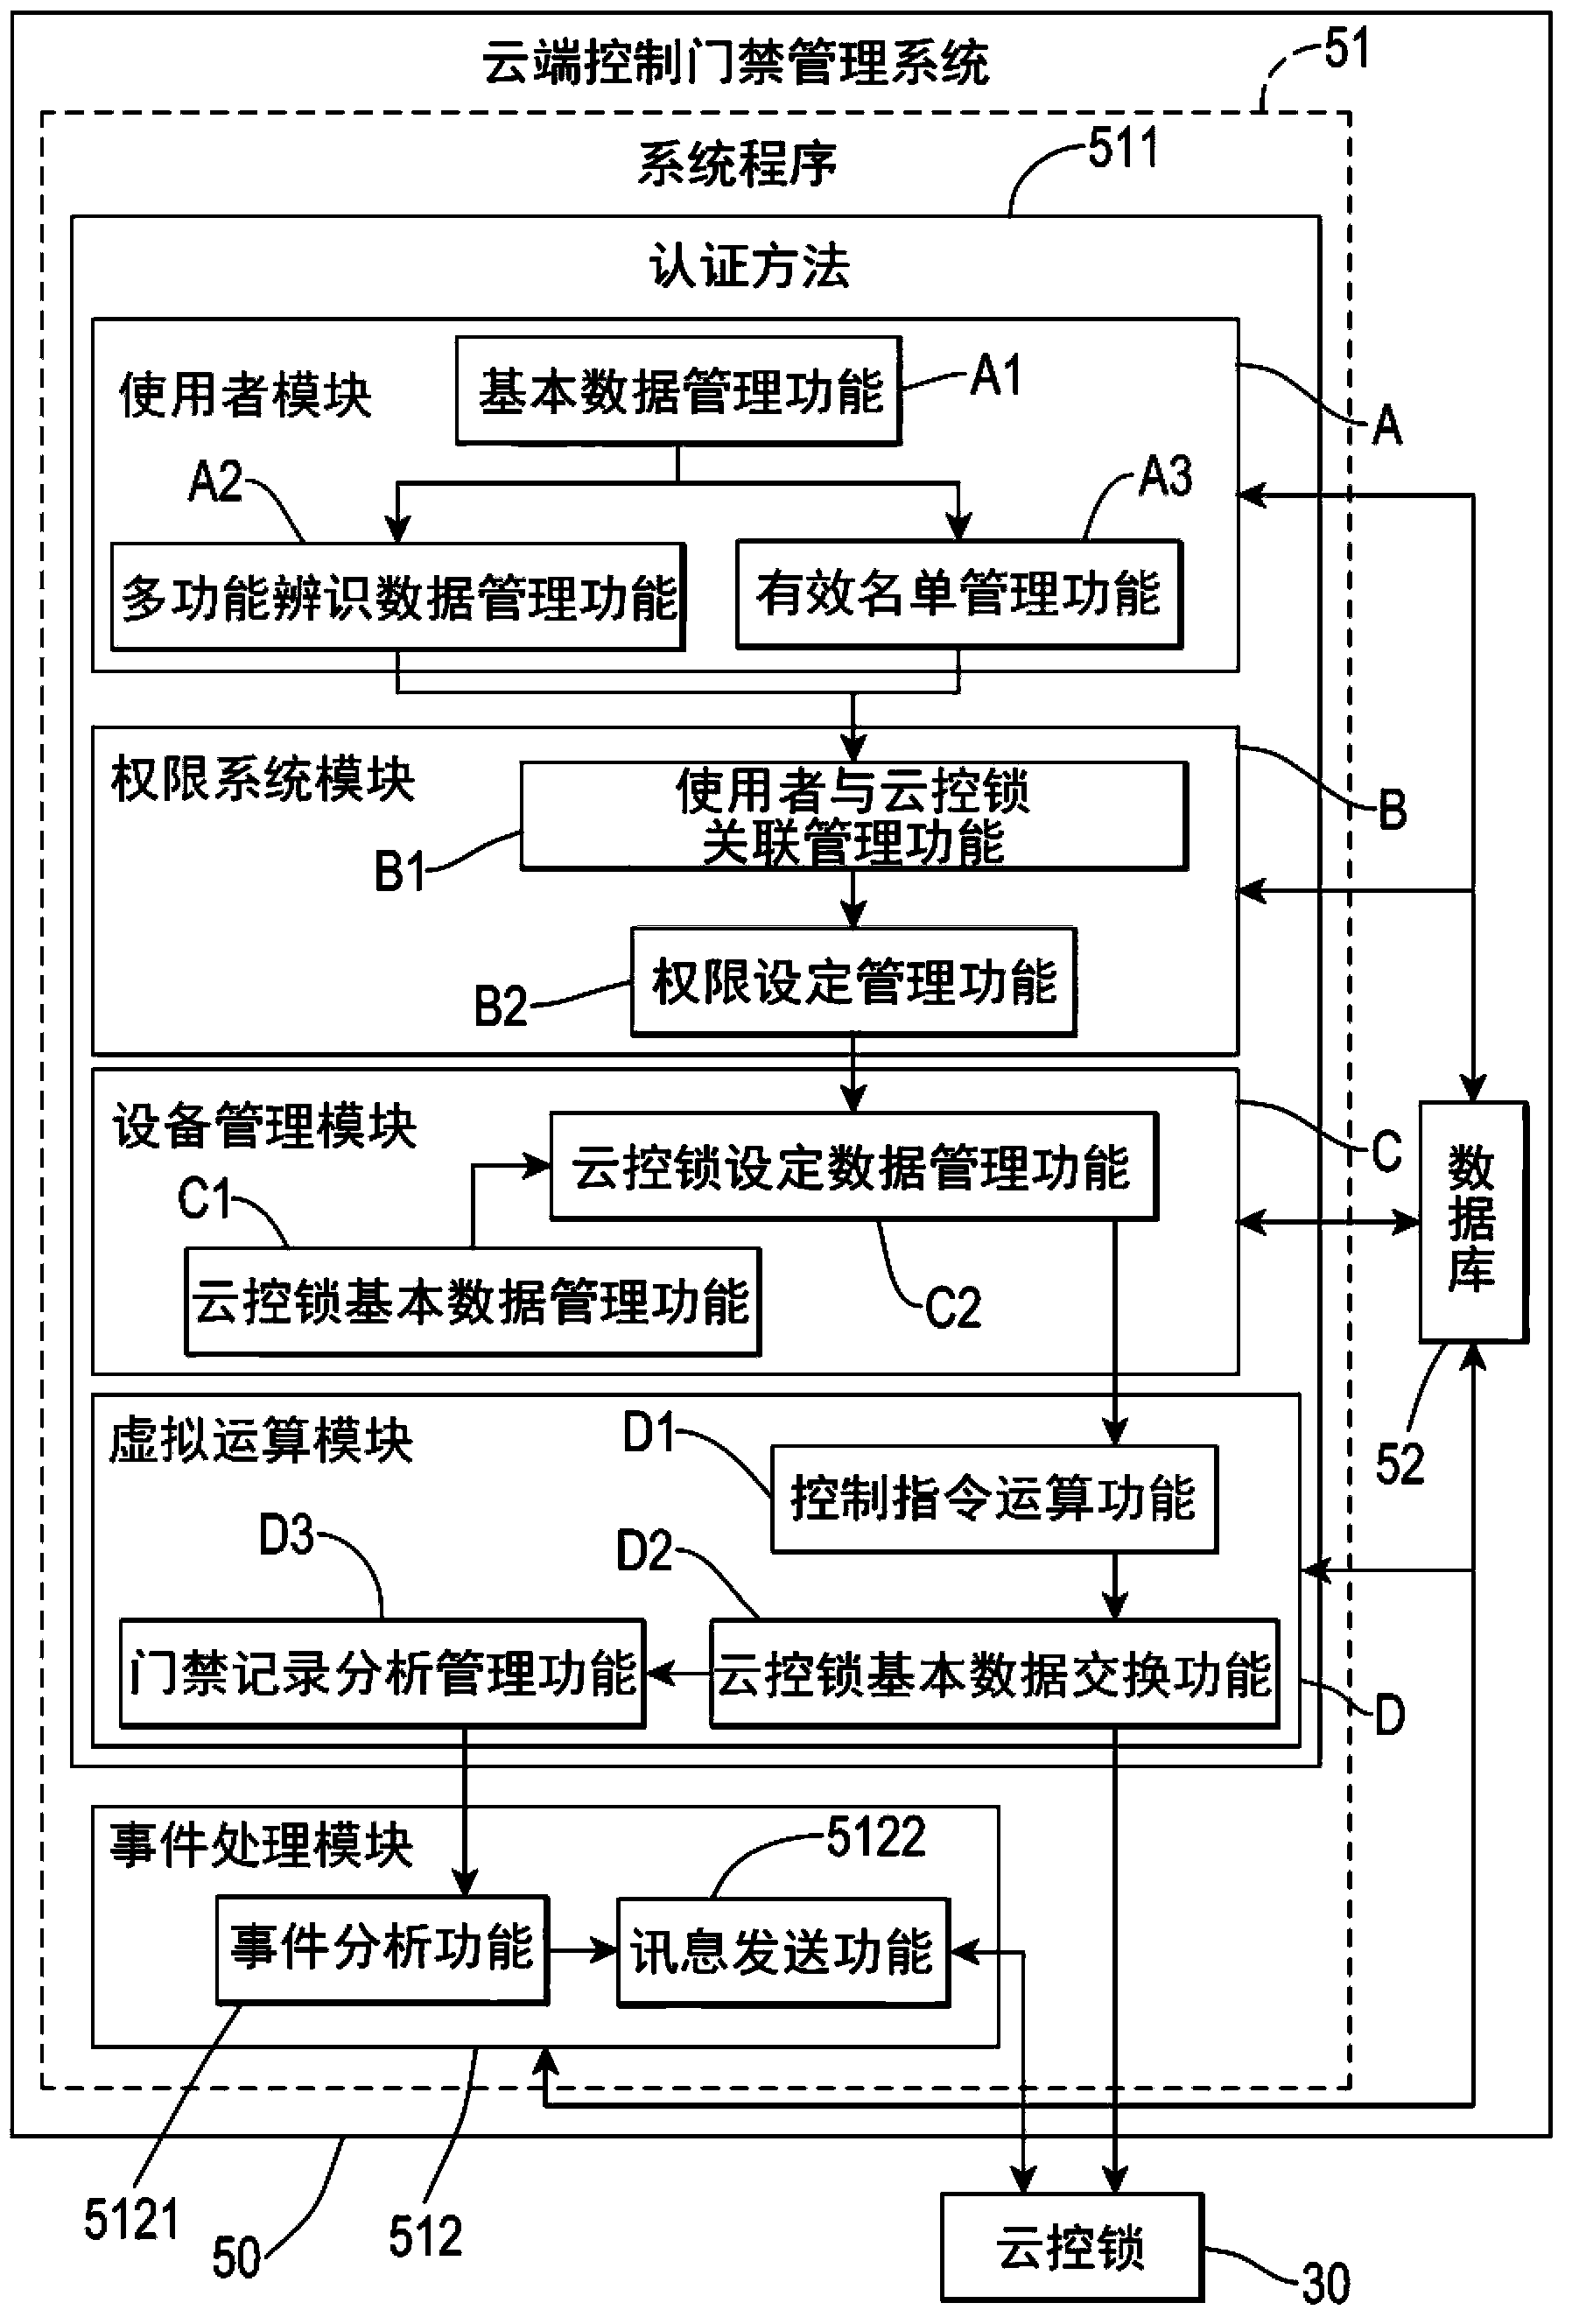 Cloud control the access control management system and the authentication method